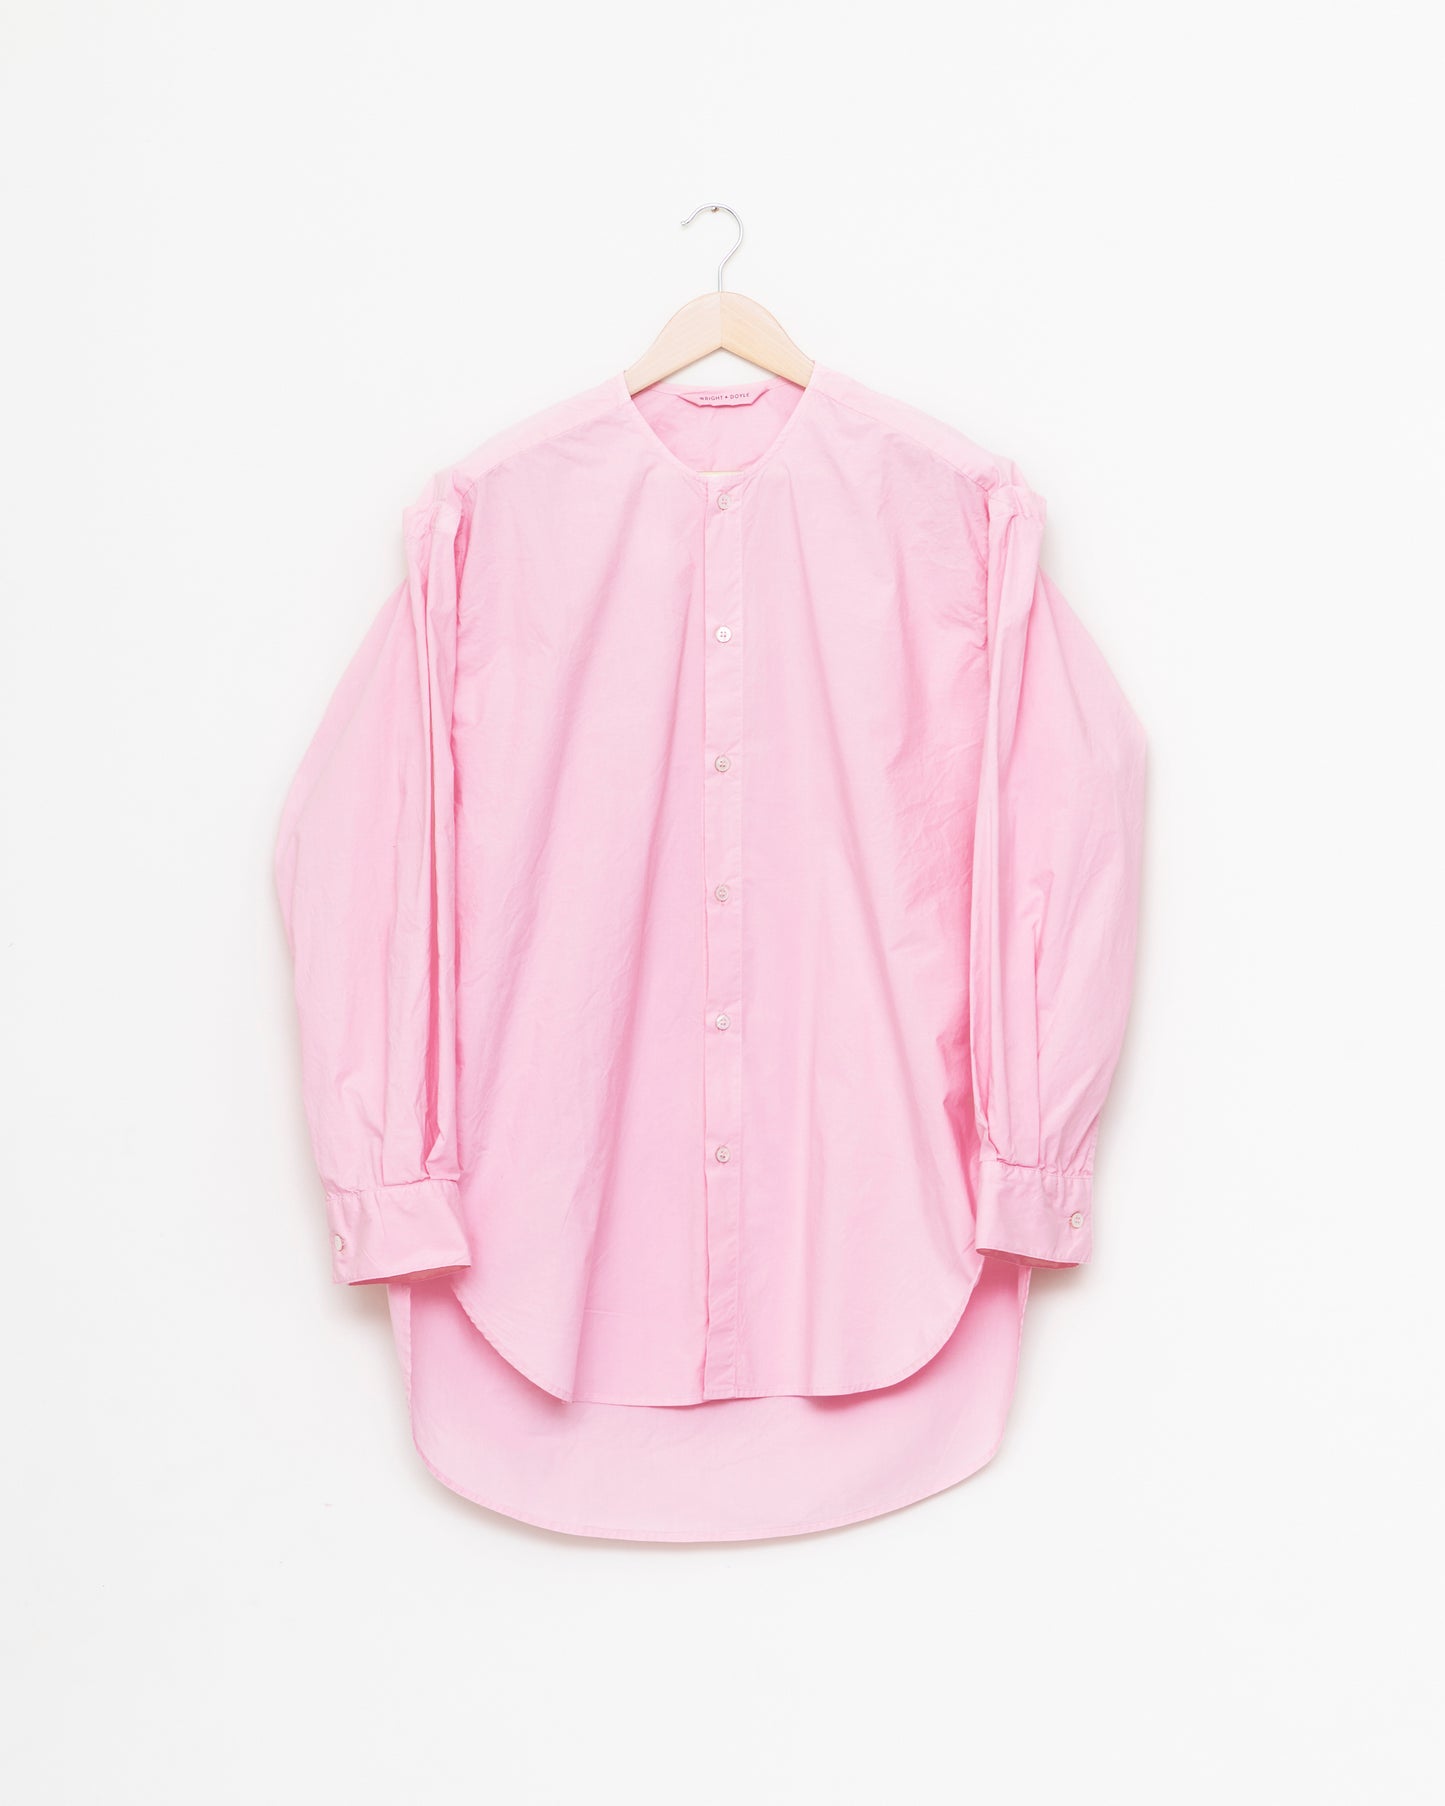 Hand-Tie Shirt in Paper Compact Cotton - Rose